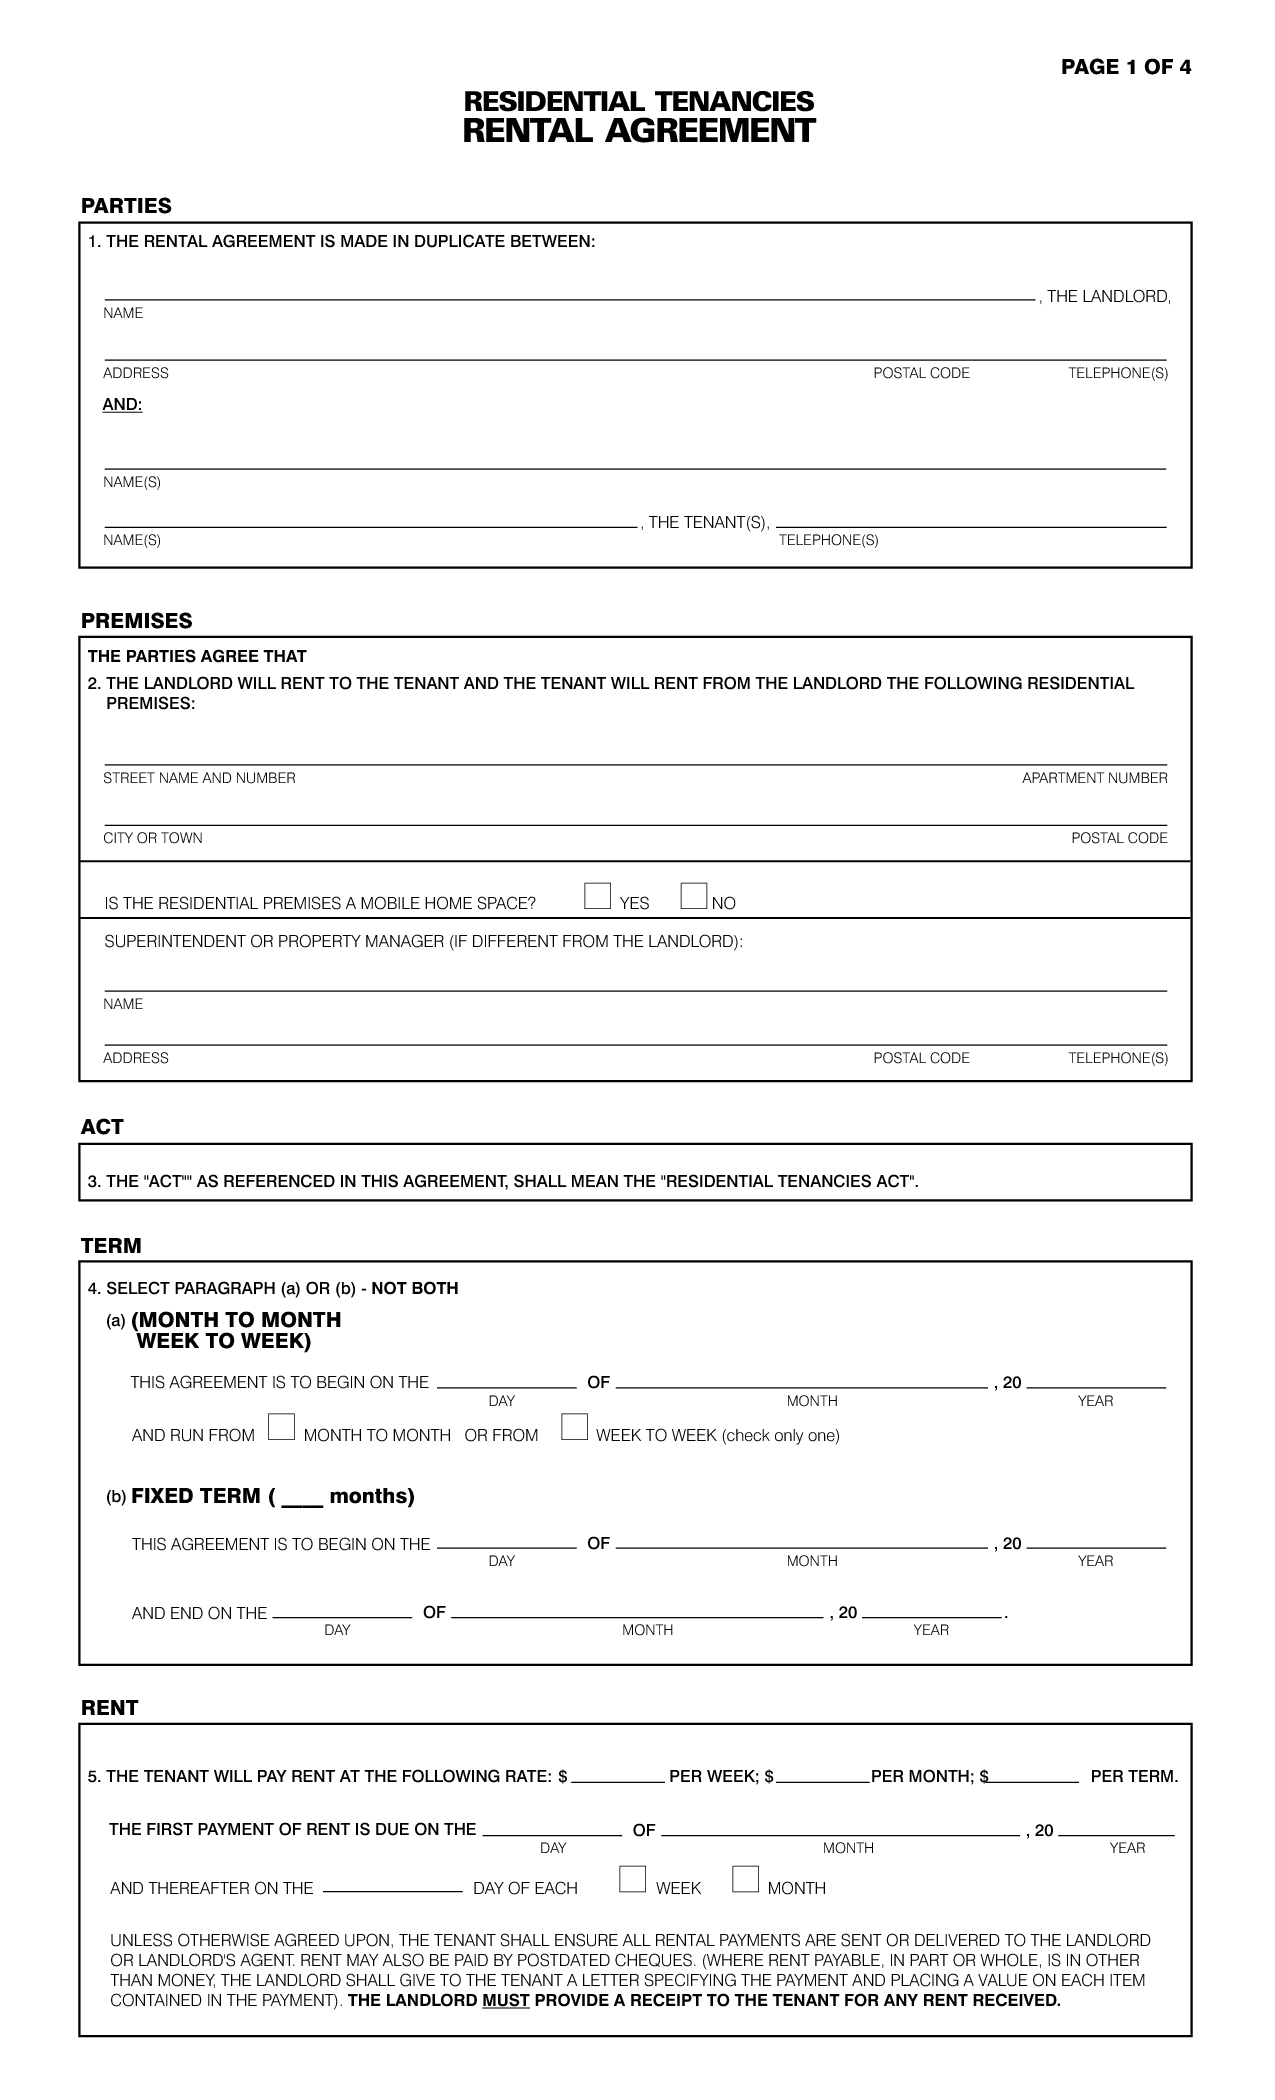 Property California Month To Month Rental Agreement Pdf | Property - Free Printable Legal Forms California